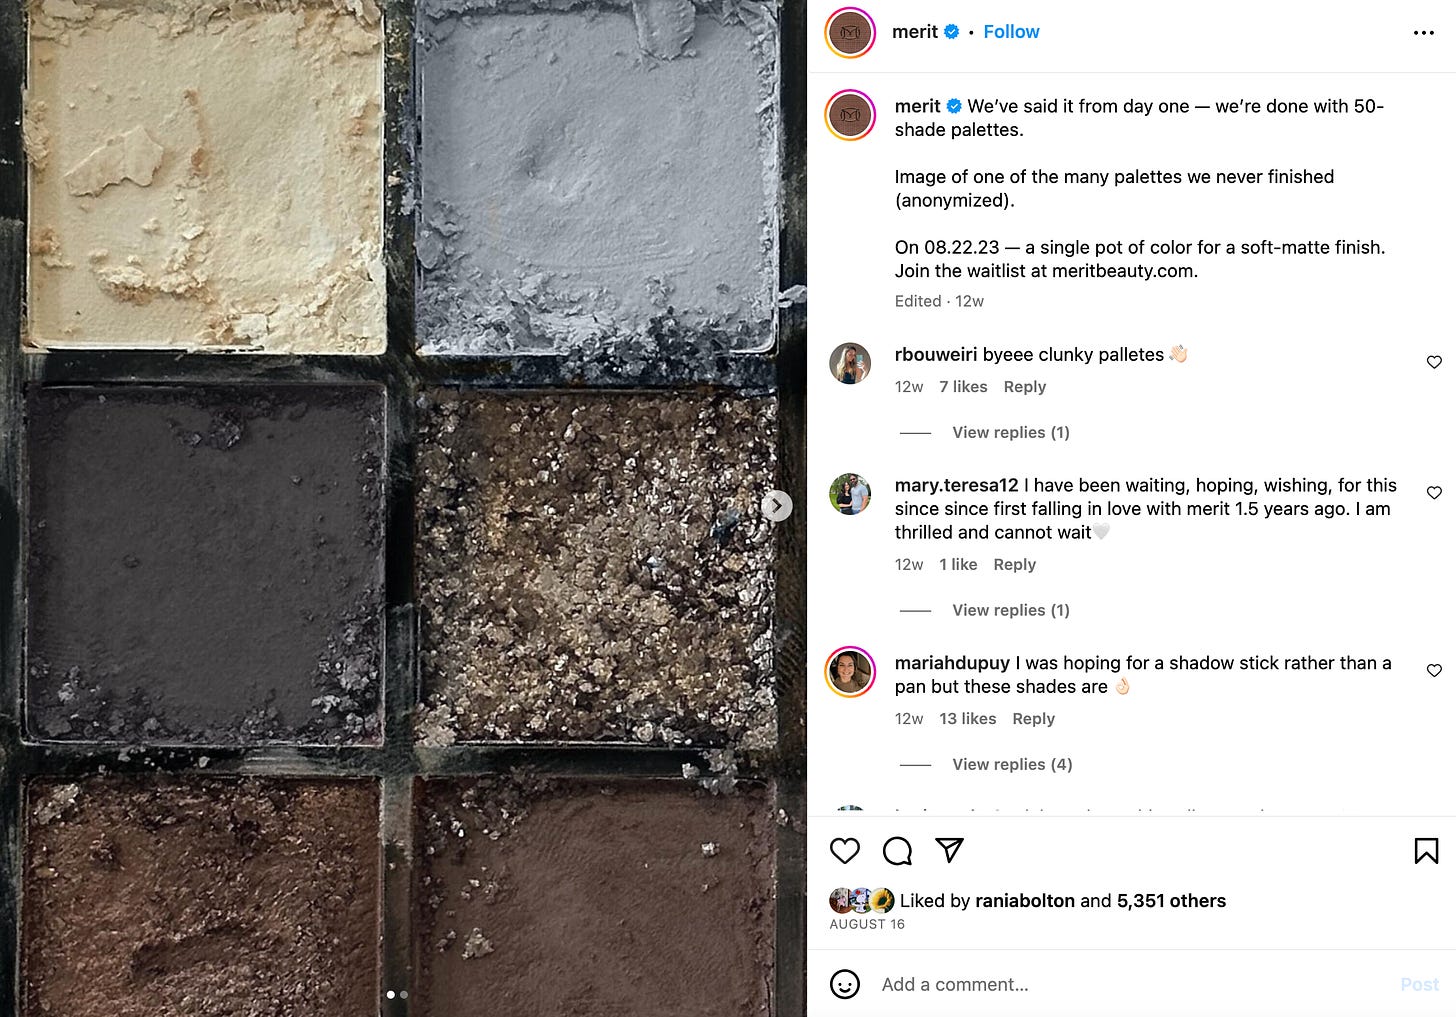 Post from Merit that's of an eyeshadow pallet. Caption says "We’ve said it from day one — we’re done with 50-shade palettes.  Image of one of the many palettes we never finished (anonymized).  On 08.22.23 — a single pot of color for a soft-matte finish. Join the waitlist at meritbeauty.com."